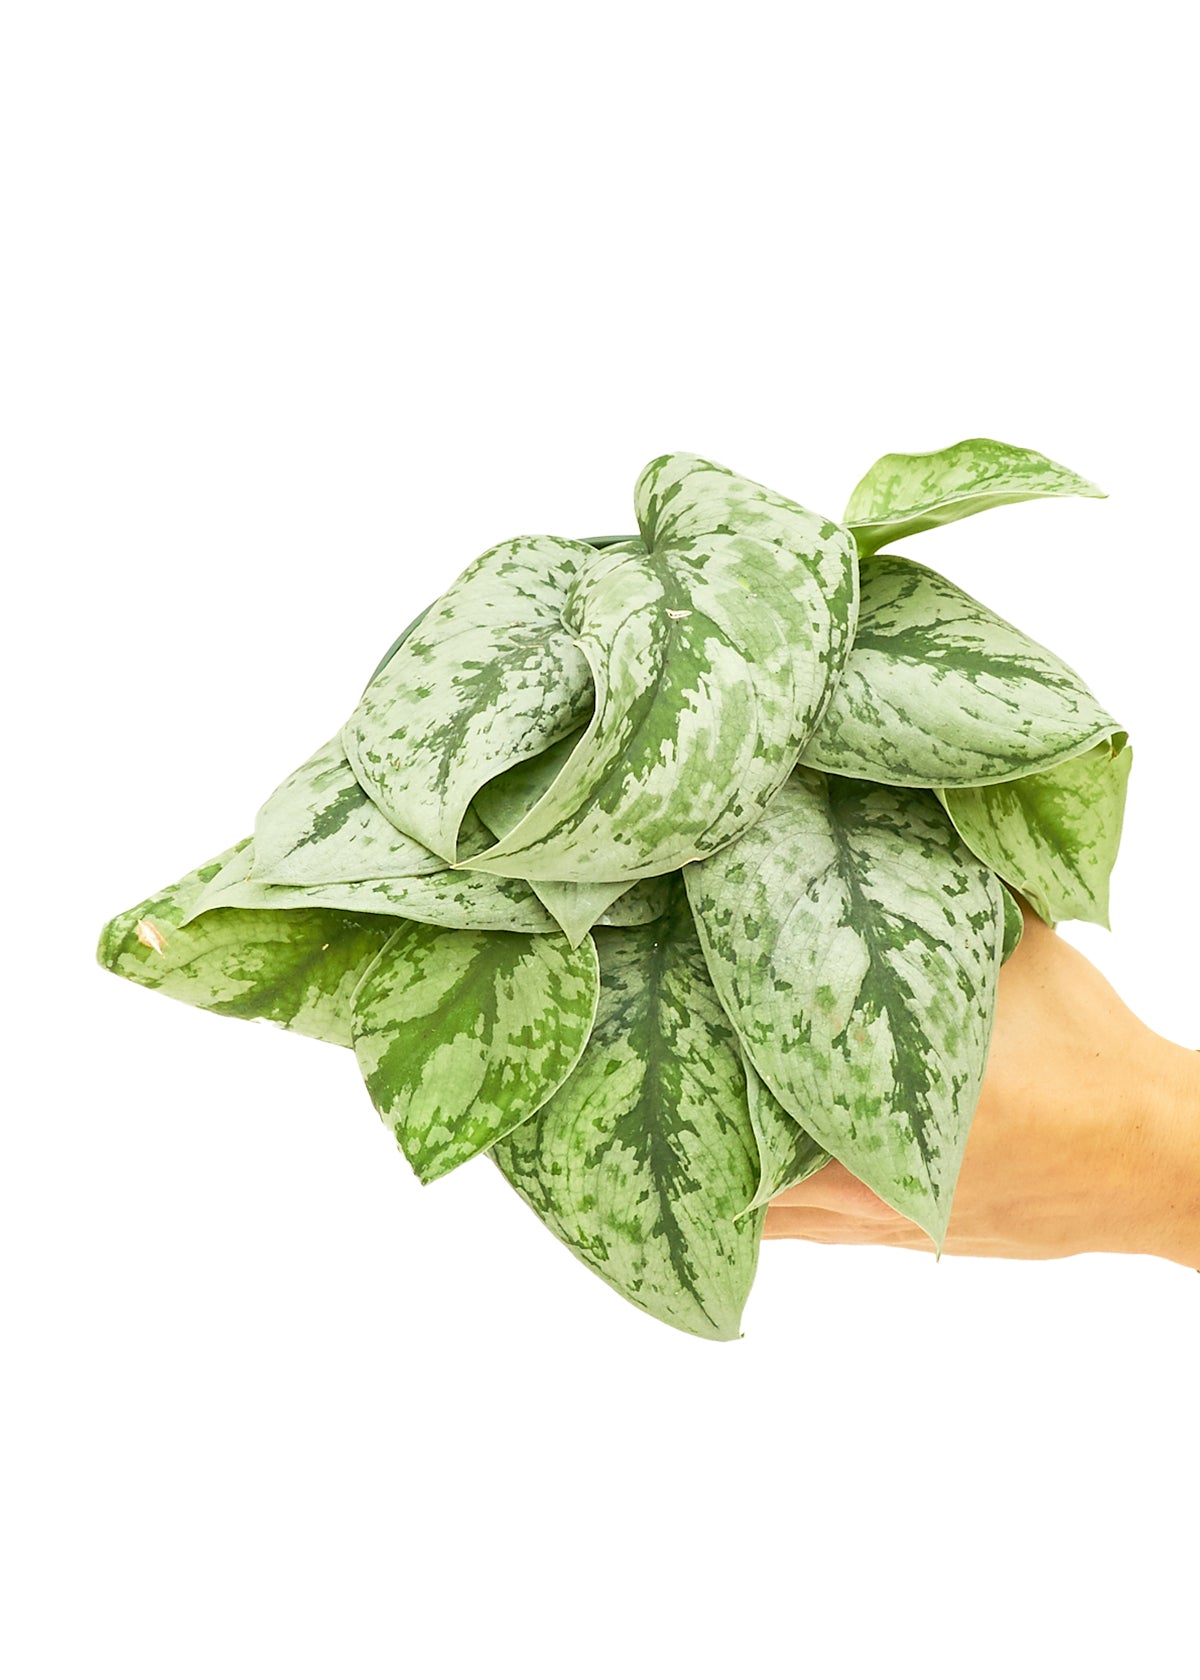 Medium size Exotica Silver Pothos Plant in a growers pot with a white background with a hand holding the pot to show the top view